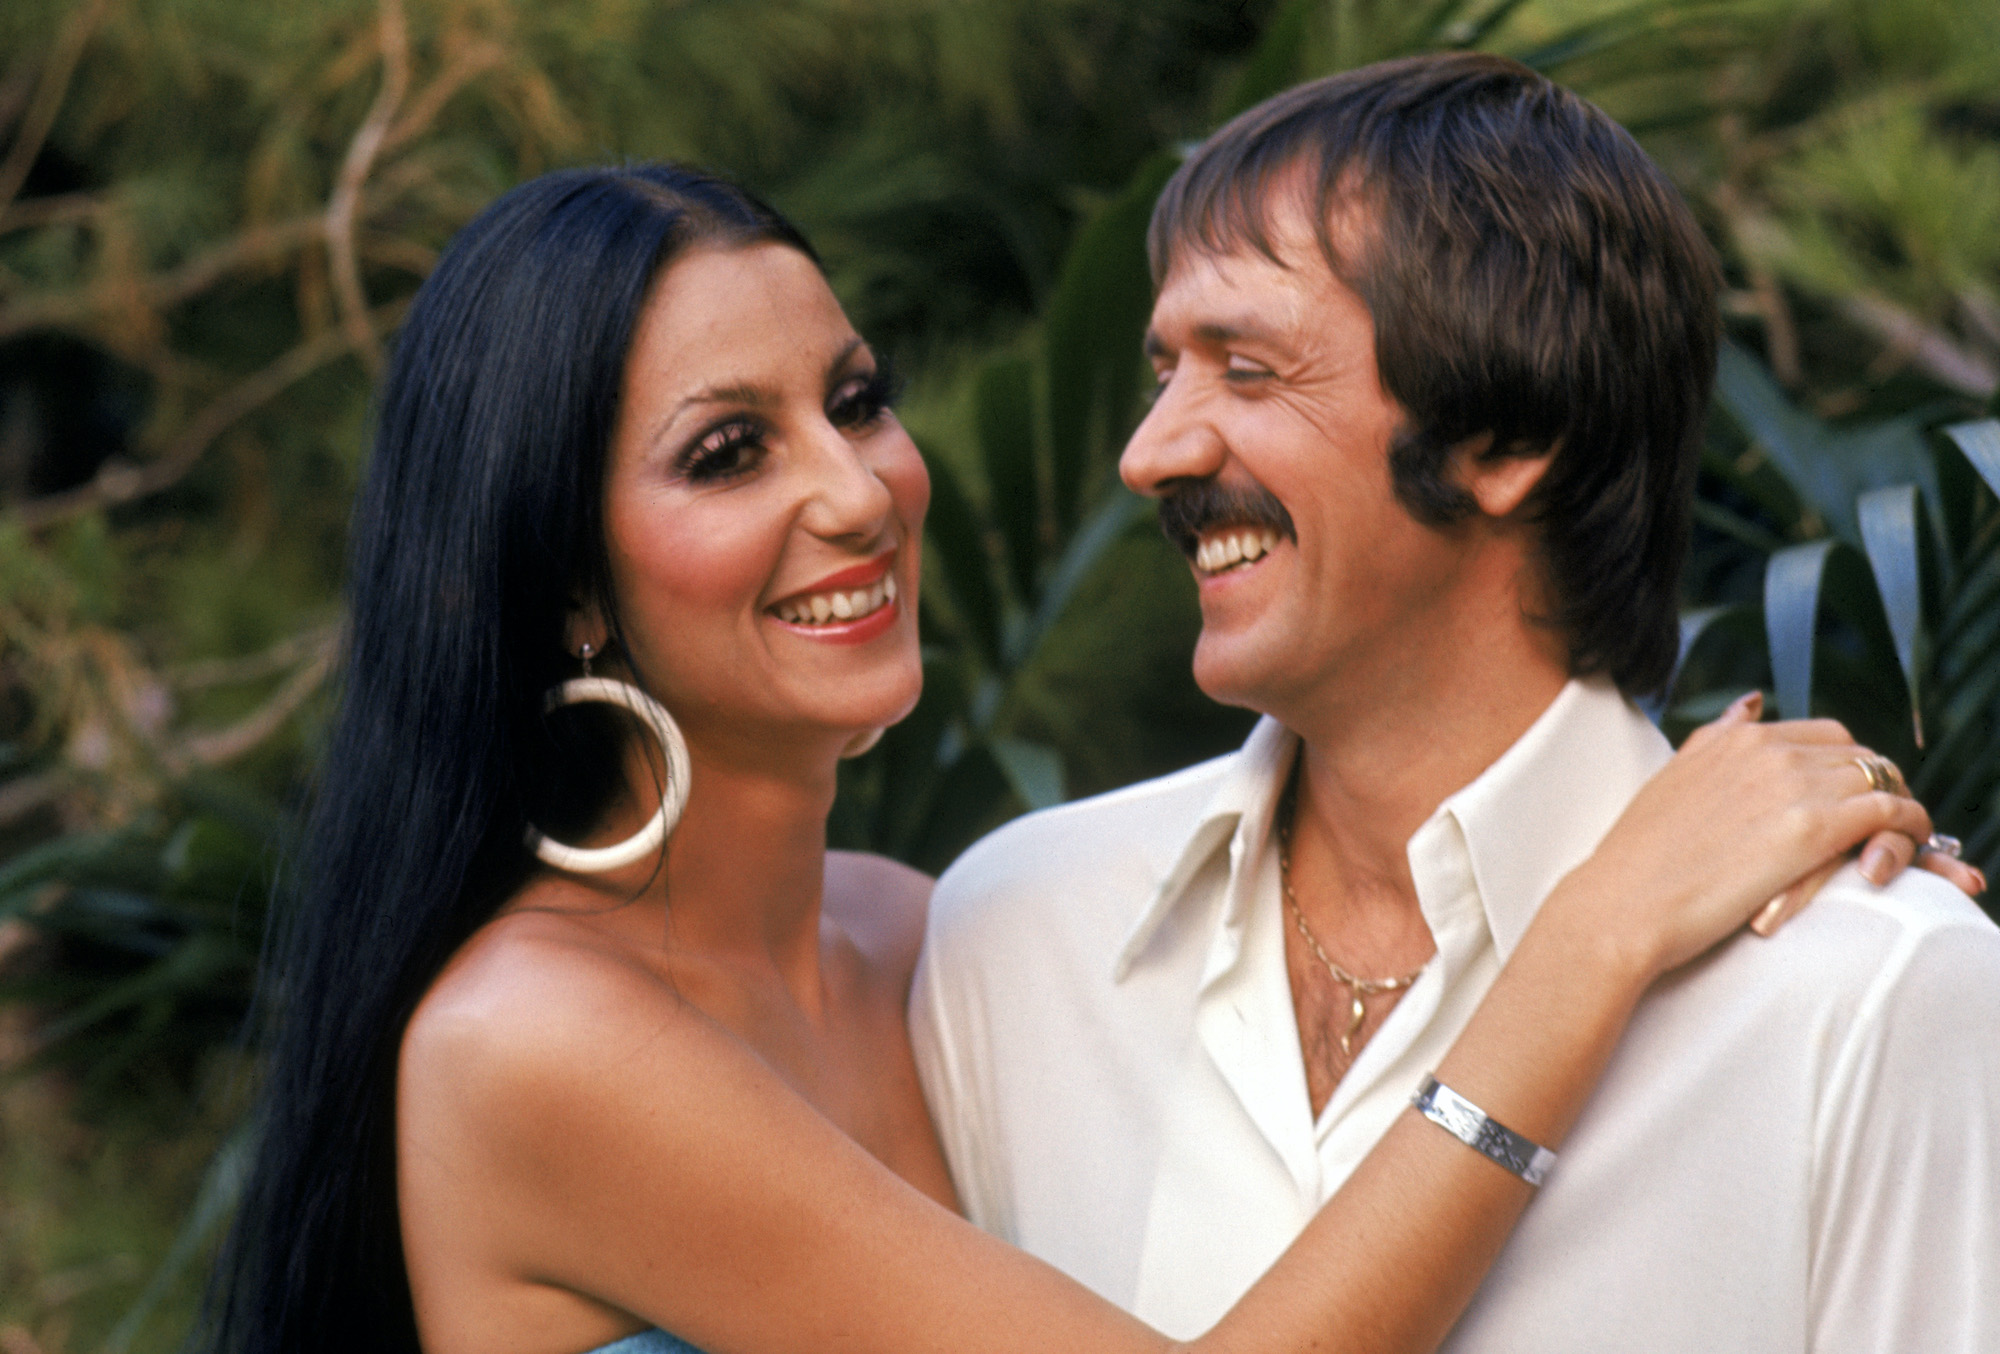 Cher Says Her Relationship With Sonny Bono Fell Apart Because He Was a 'Huge Womanizer'